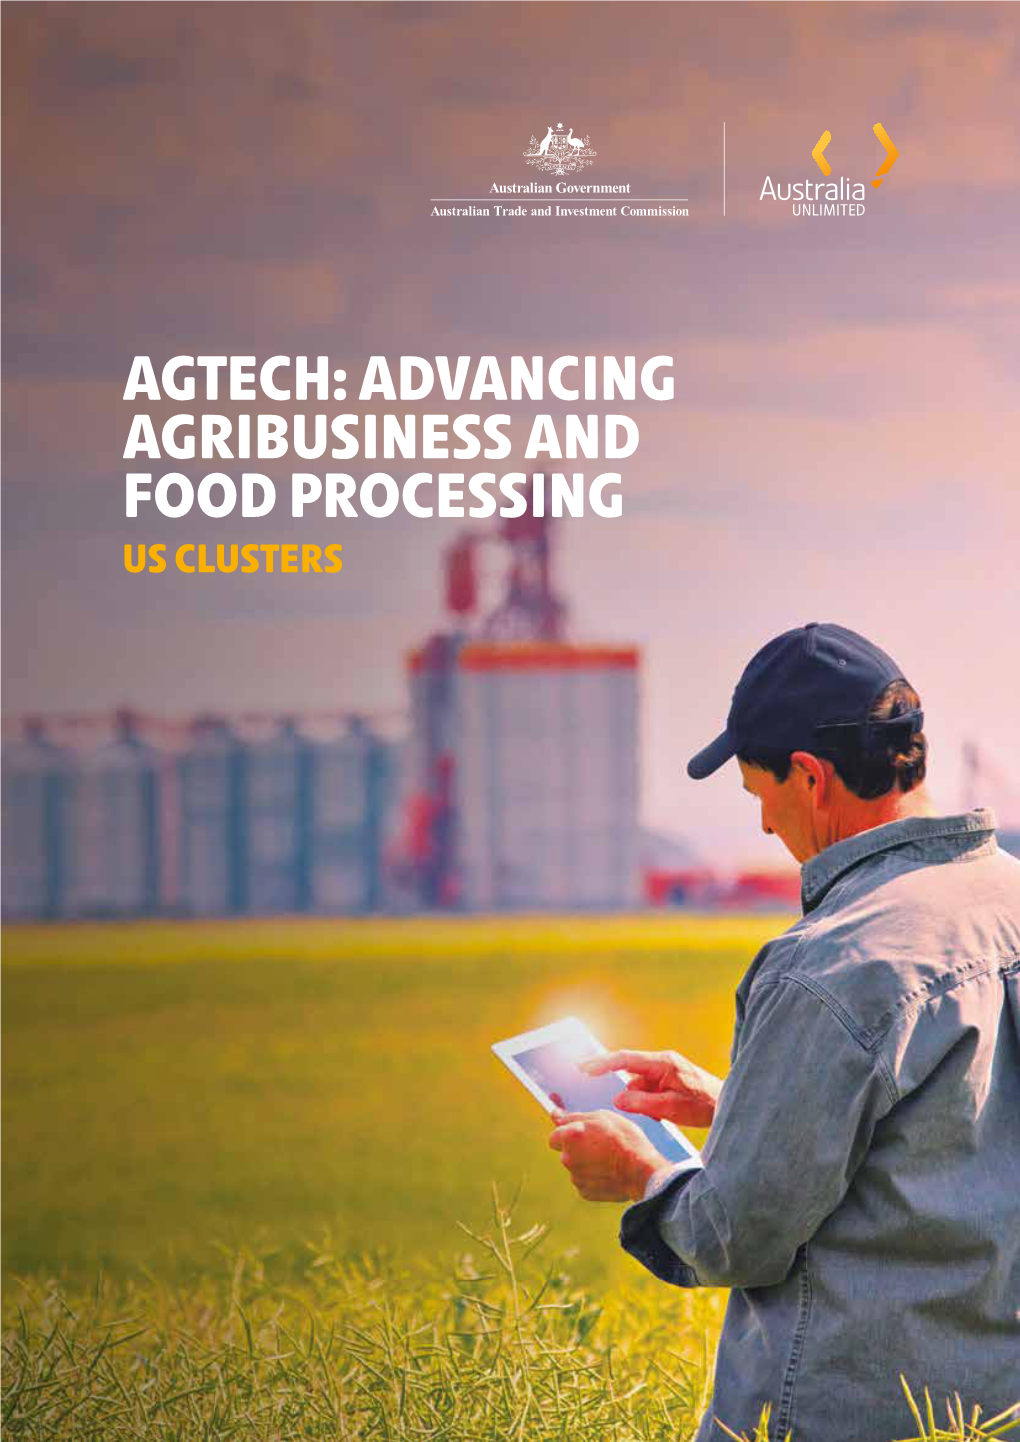 Us Agtech Clusters: Advancing Agribusiness and Food Processing 01 Introduction